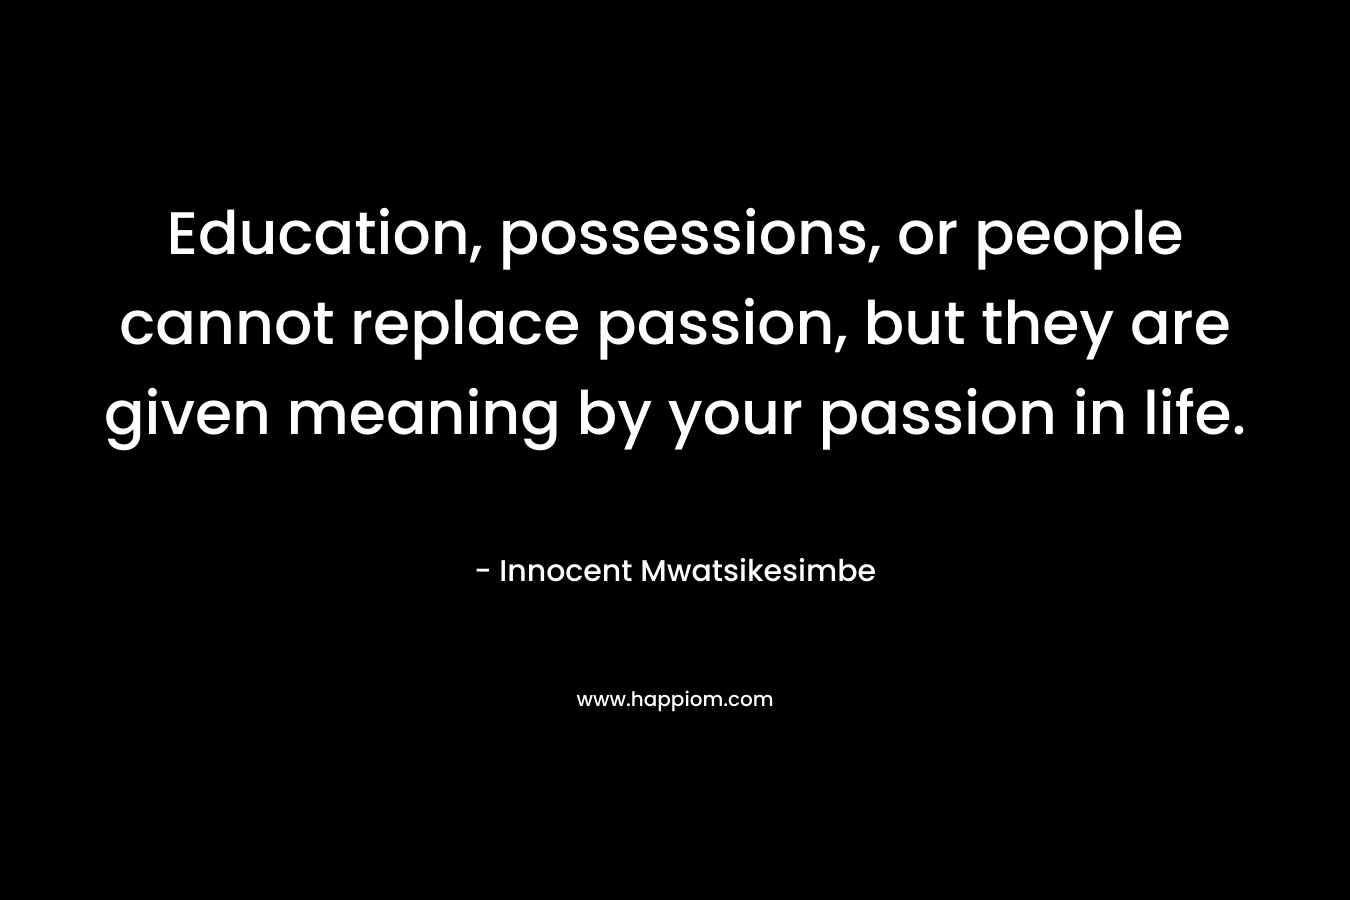 Education, possessions, or people cannot replace passion, but they are given meaning by your passion in life.